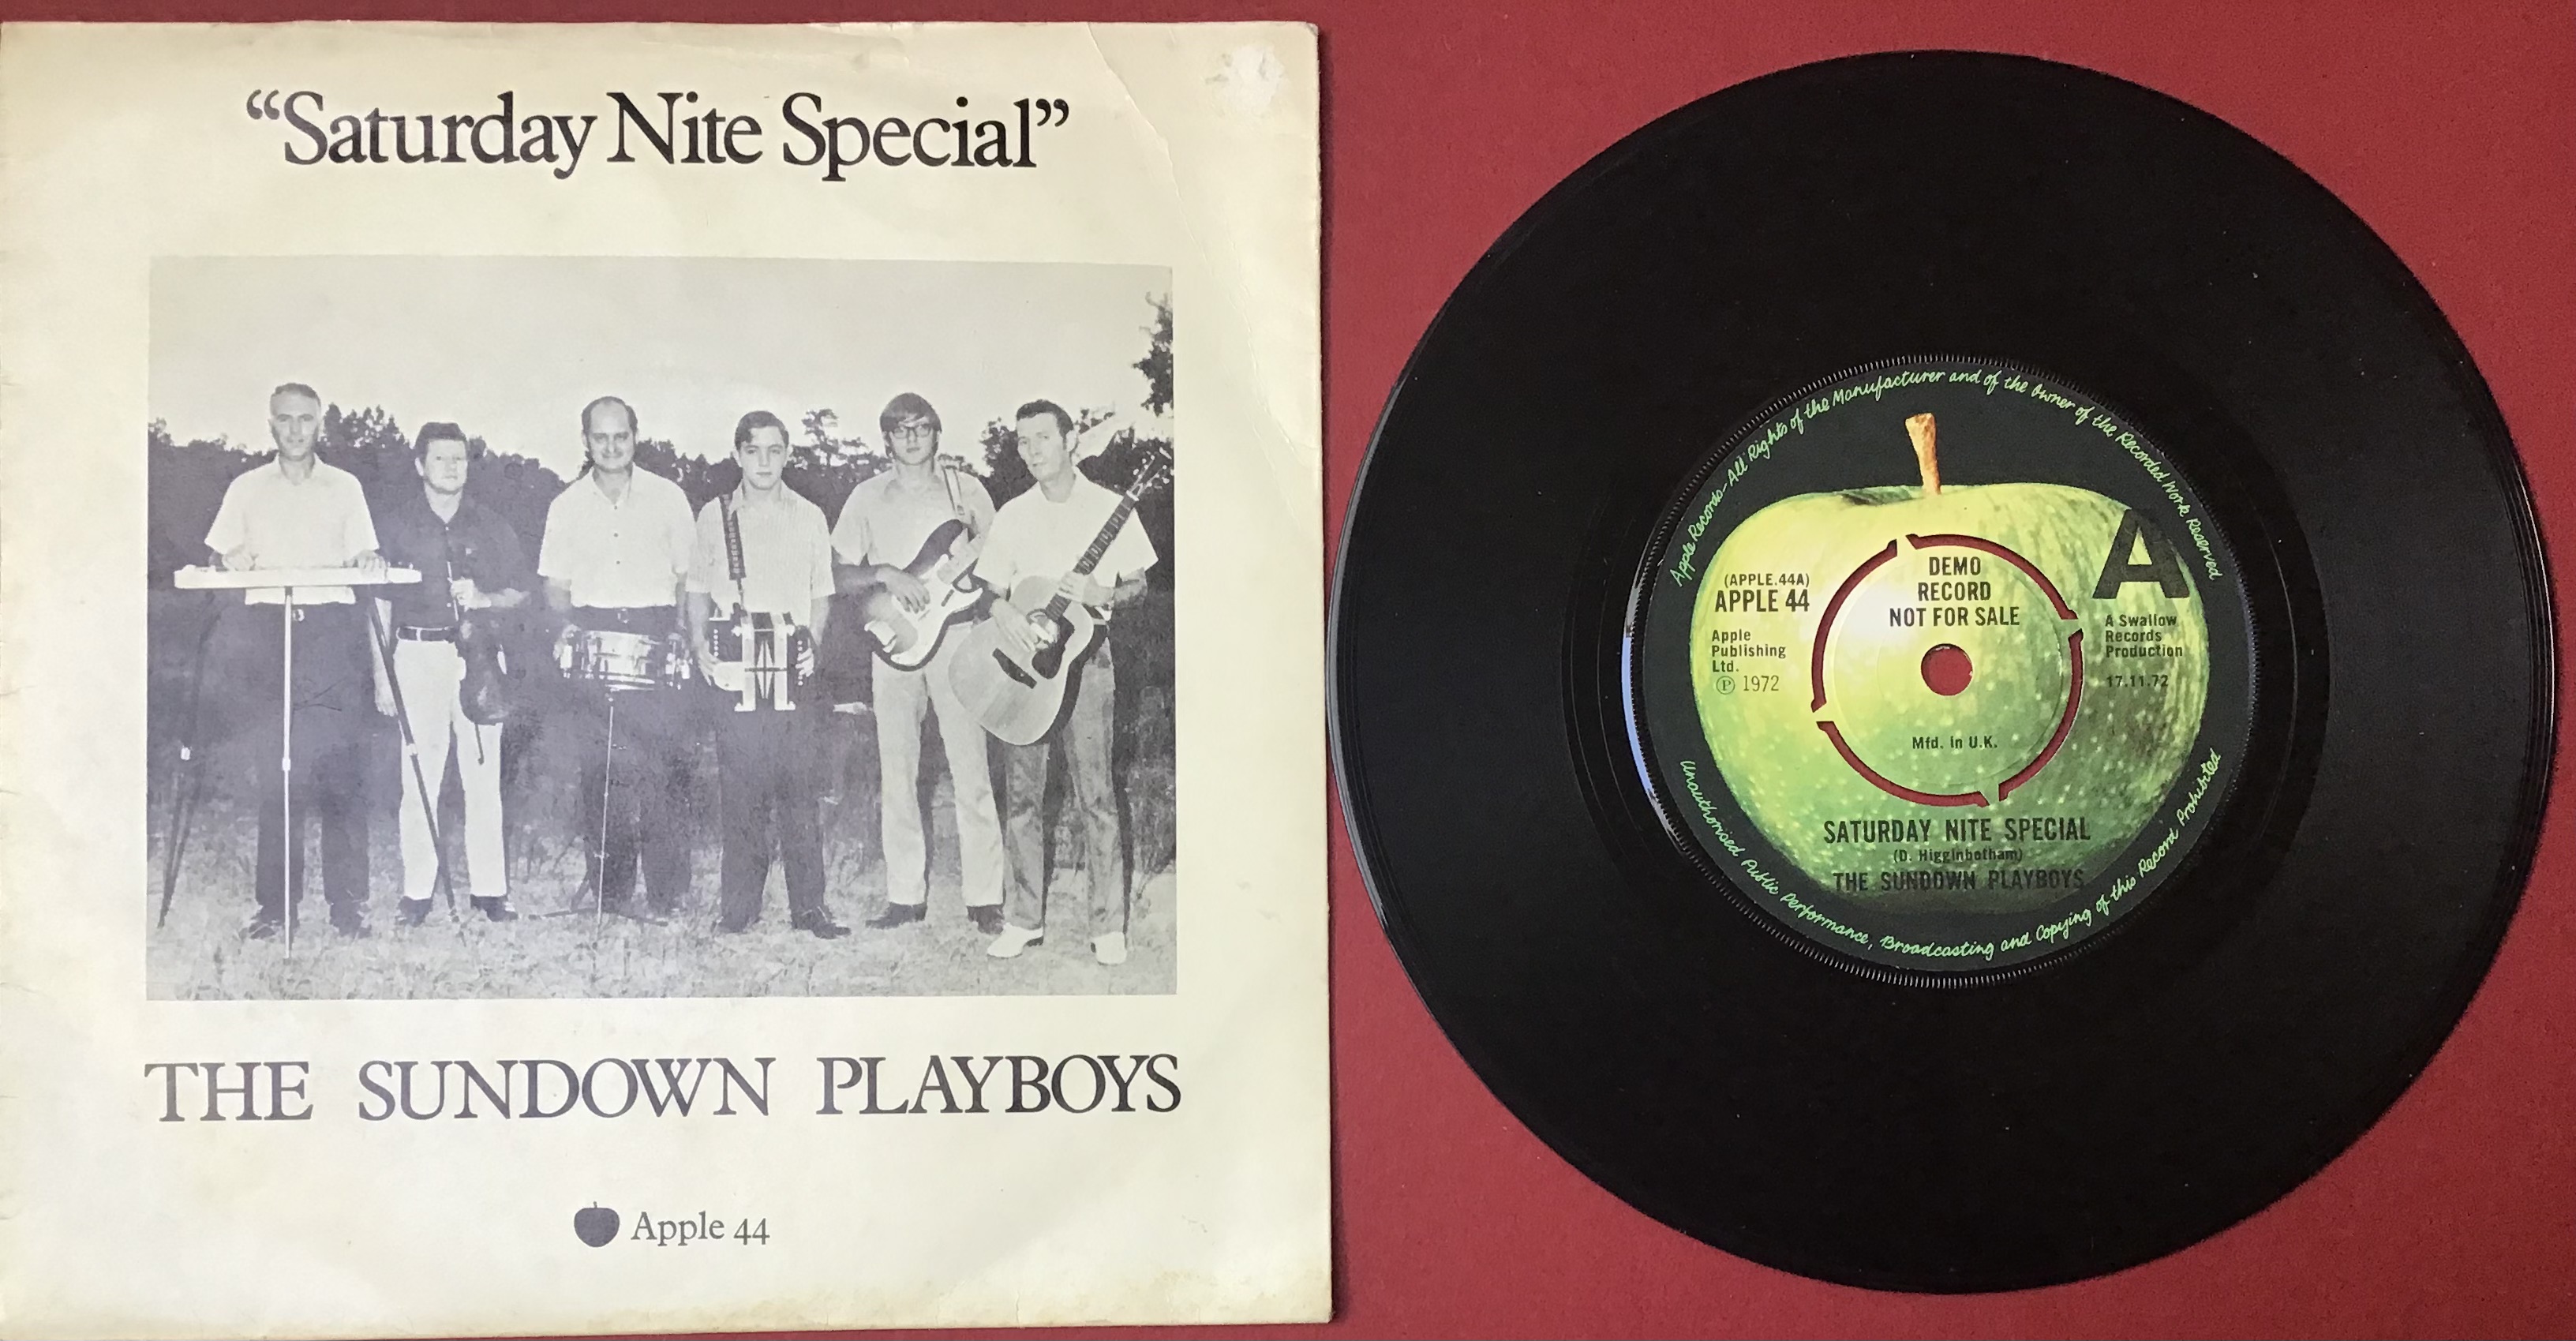 THE SUNDOWN PLAYBOYS 'SATURDAY NITE SPECIAL' SINGLE DEMO RECORD. From 1972 this was released